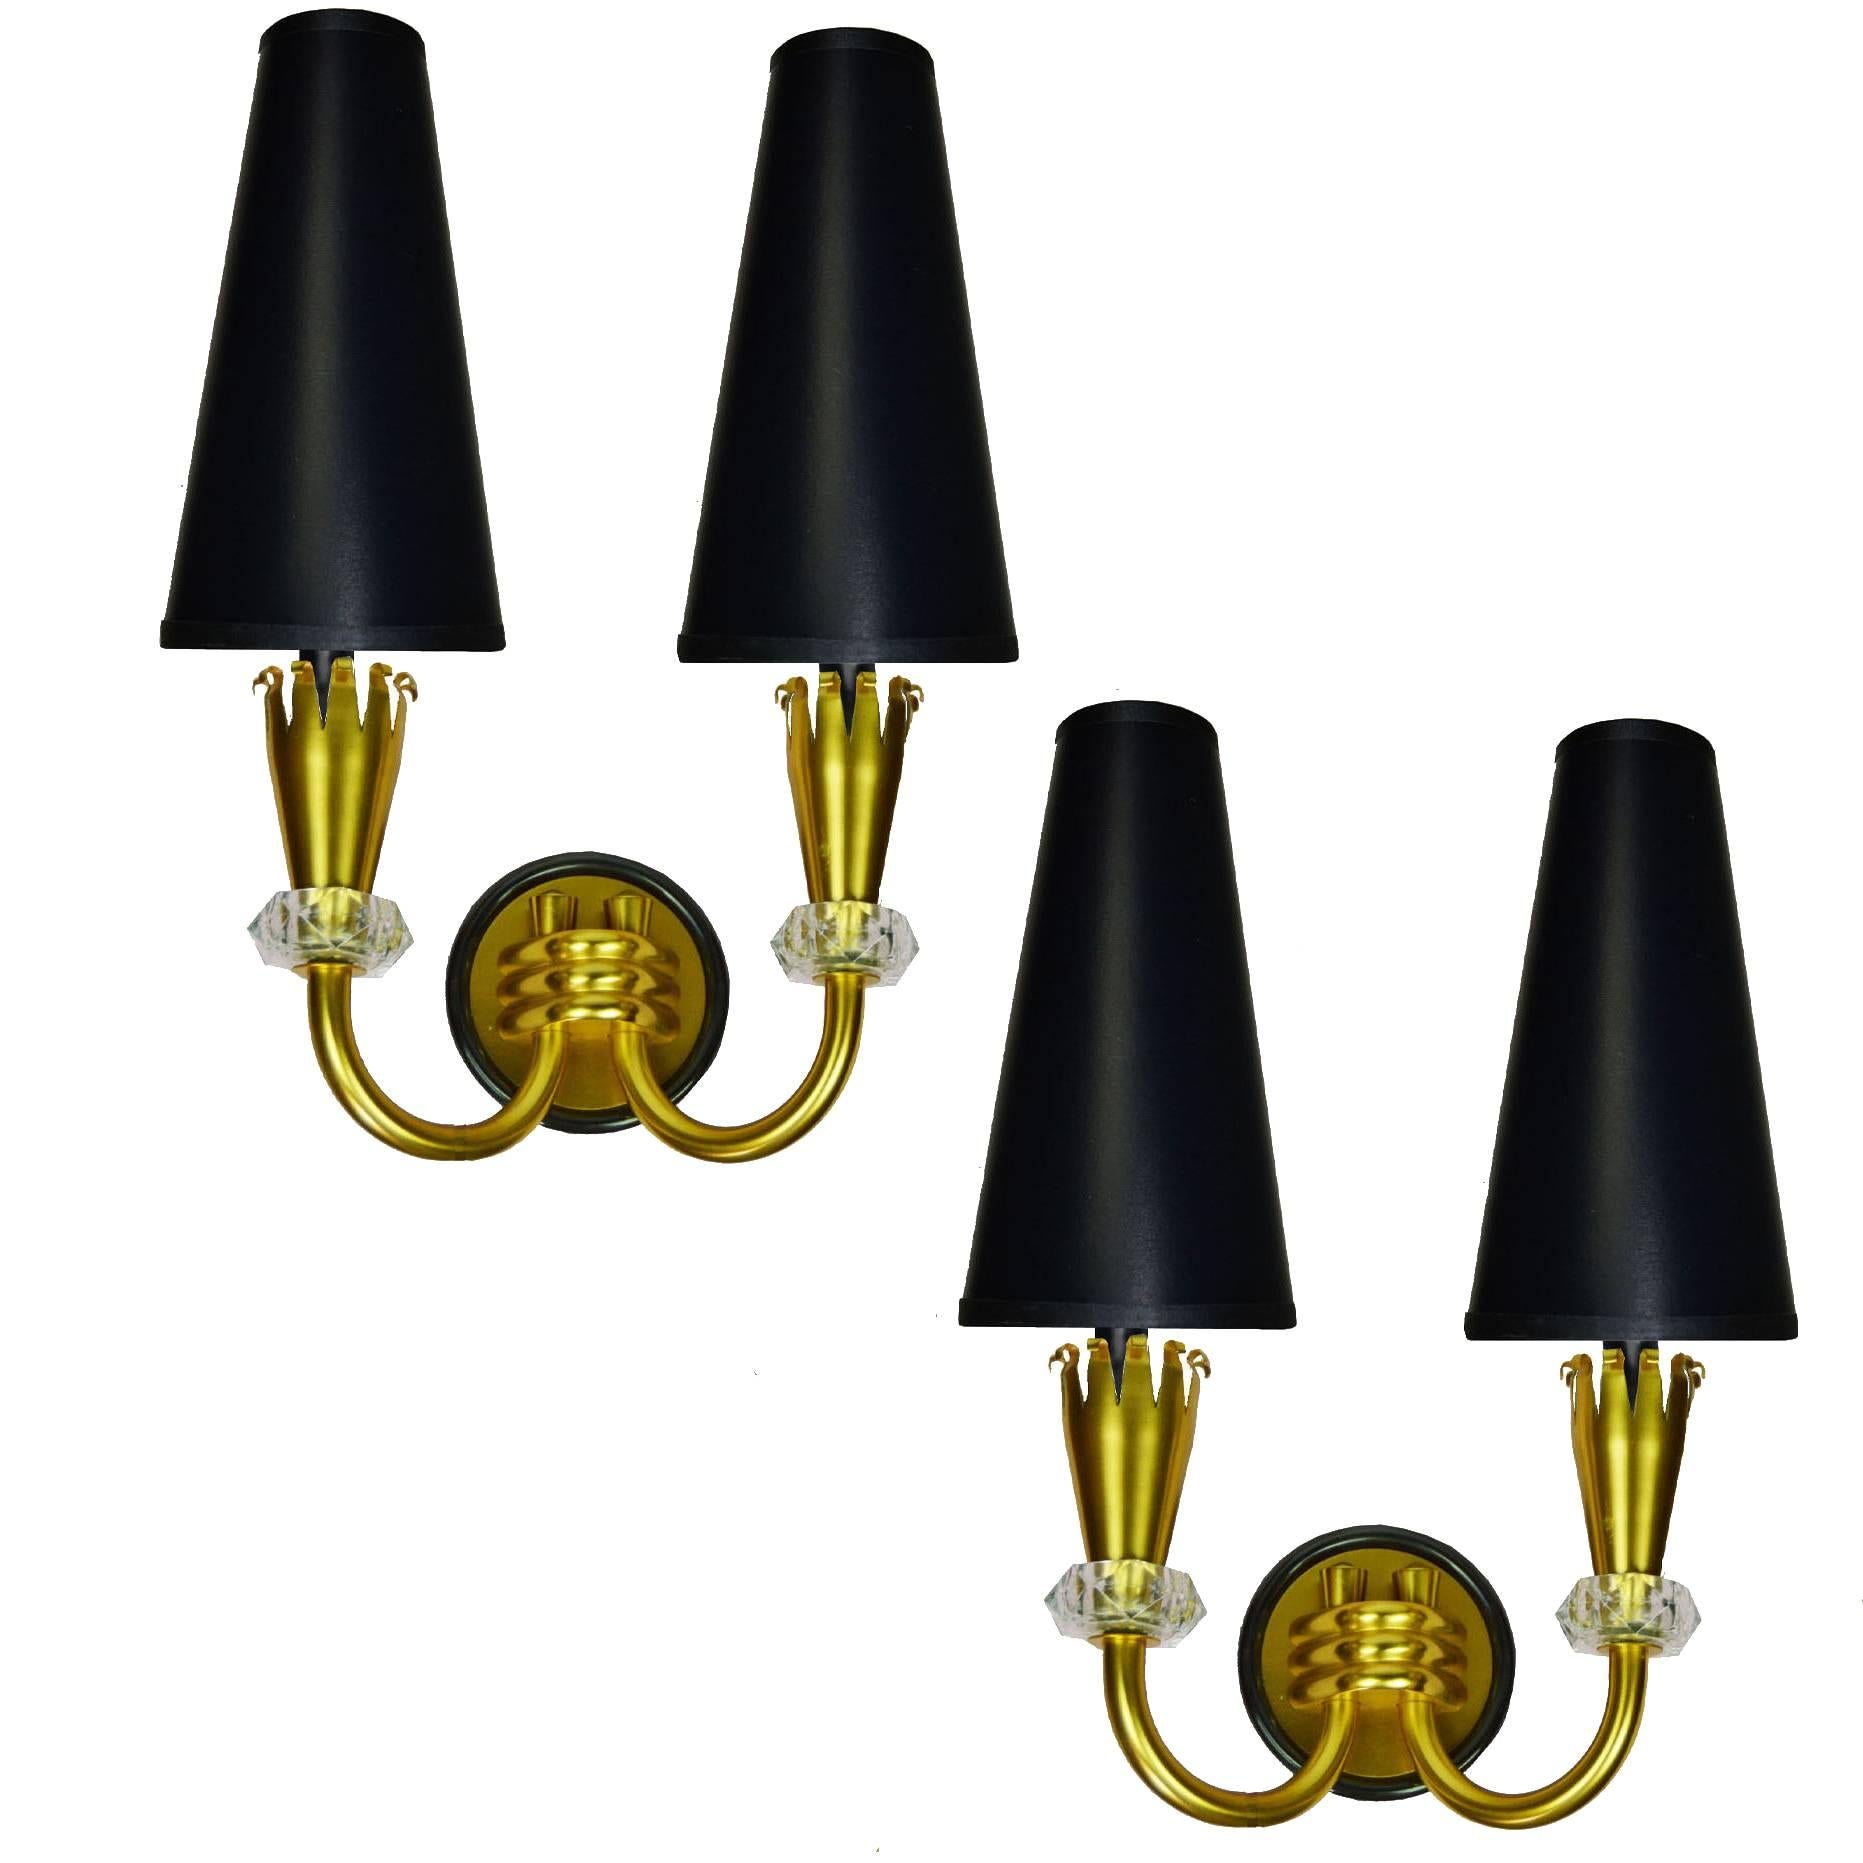 Pair of Sconces by Royal-Lumieres. 3 pairs available. Priced by pair